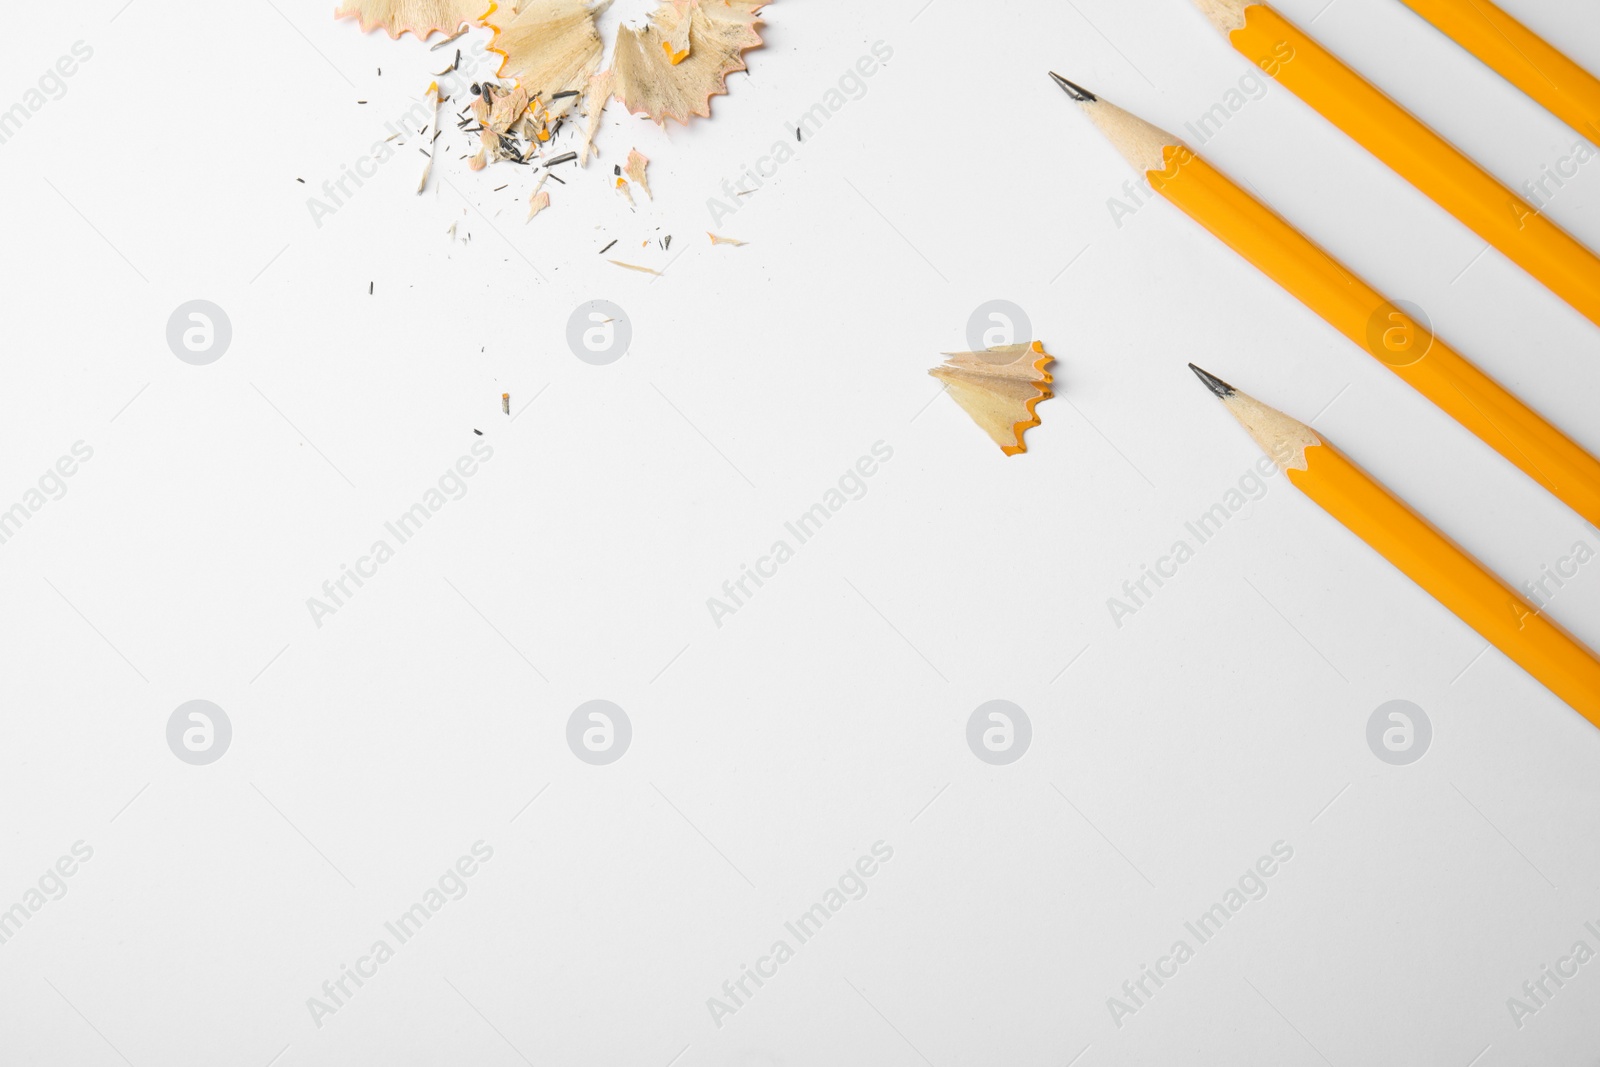 Photo of Graphite pencils and shavings on white background, top view. Space for text